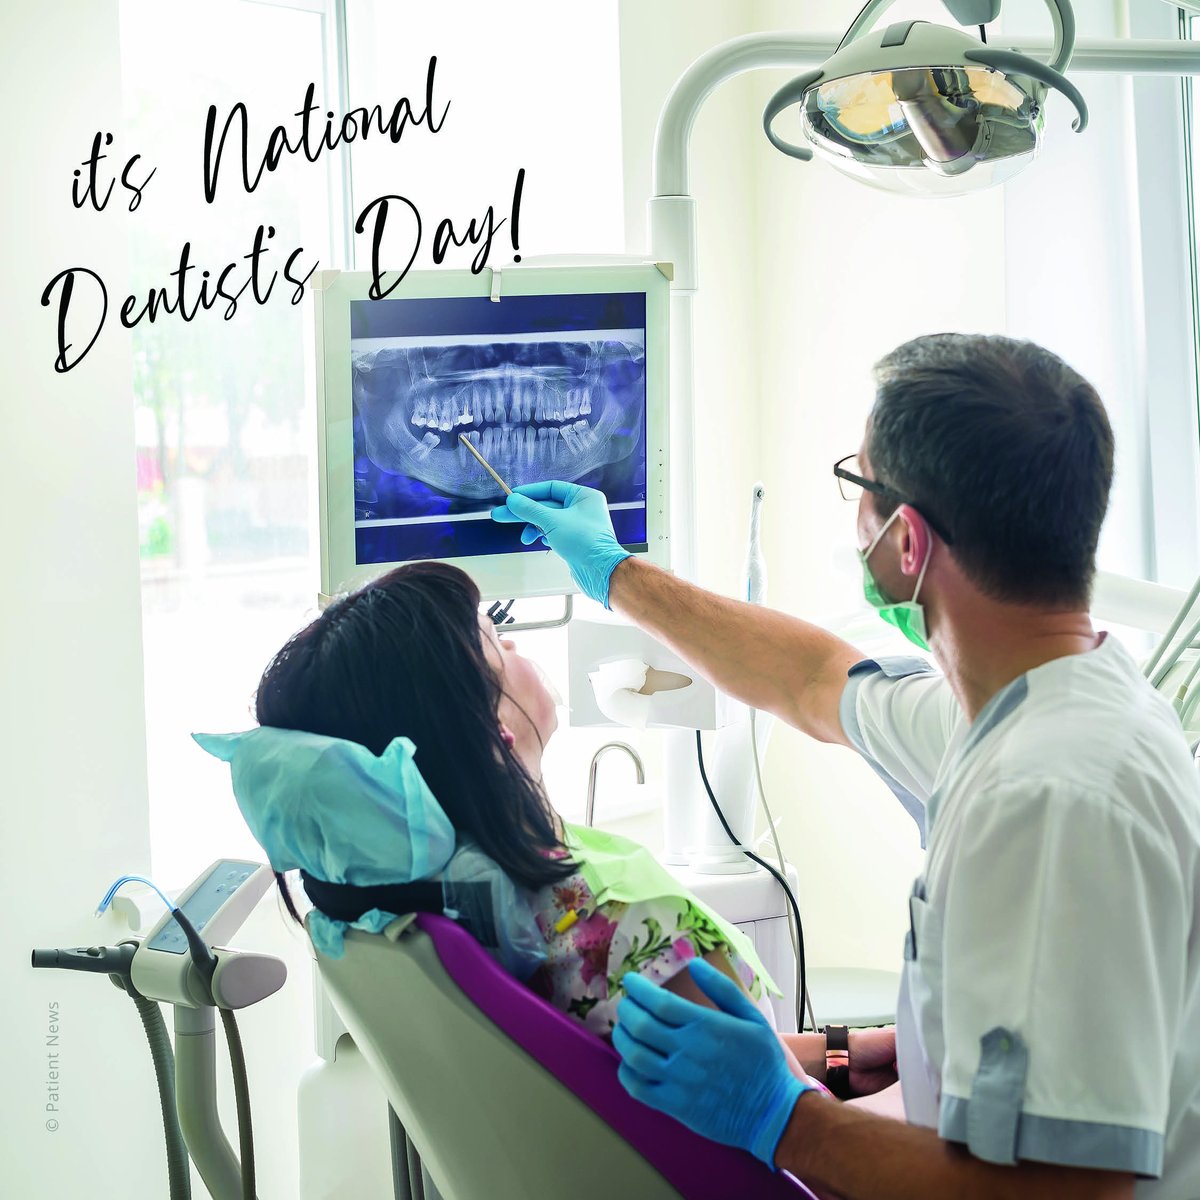 The best part of today is knowing we can help you smile your best smile, with optimum health and confidence. Thank you so much for your trust. You mean with world to us! #nationaldentistday #smile #PeabodyDentalCare #dentistsinPeabody #PeabodyDentists https://t.co/cj9wSZNFxr